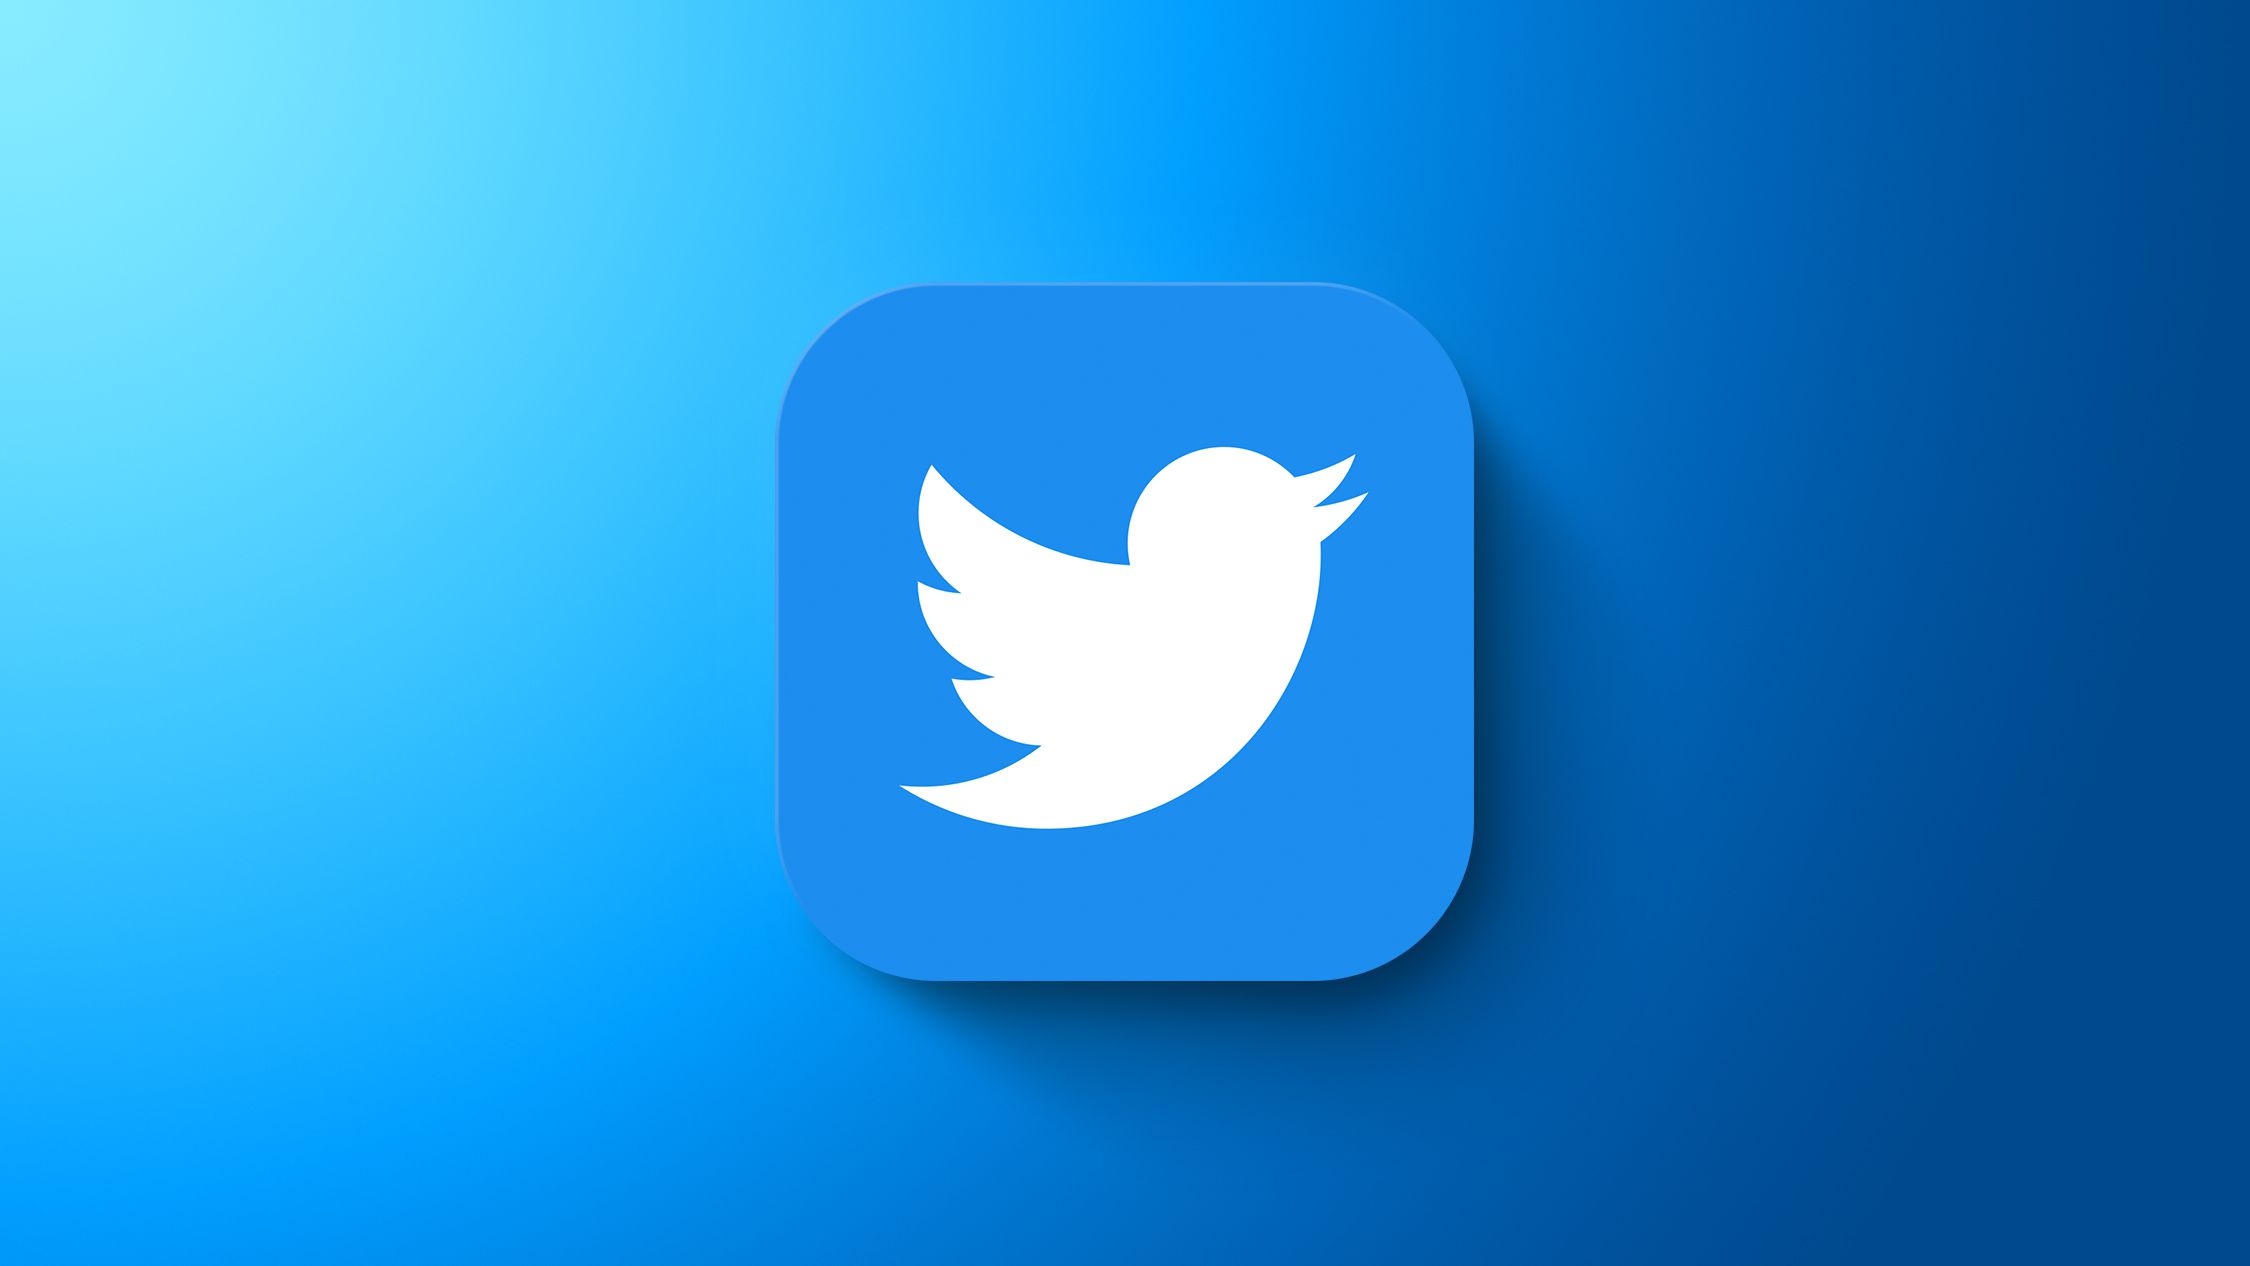 Starting December 12, Twitter introduces an $8 or $11 Blue subscription for iOS